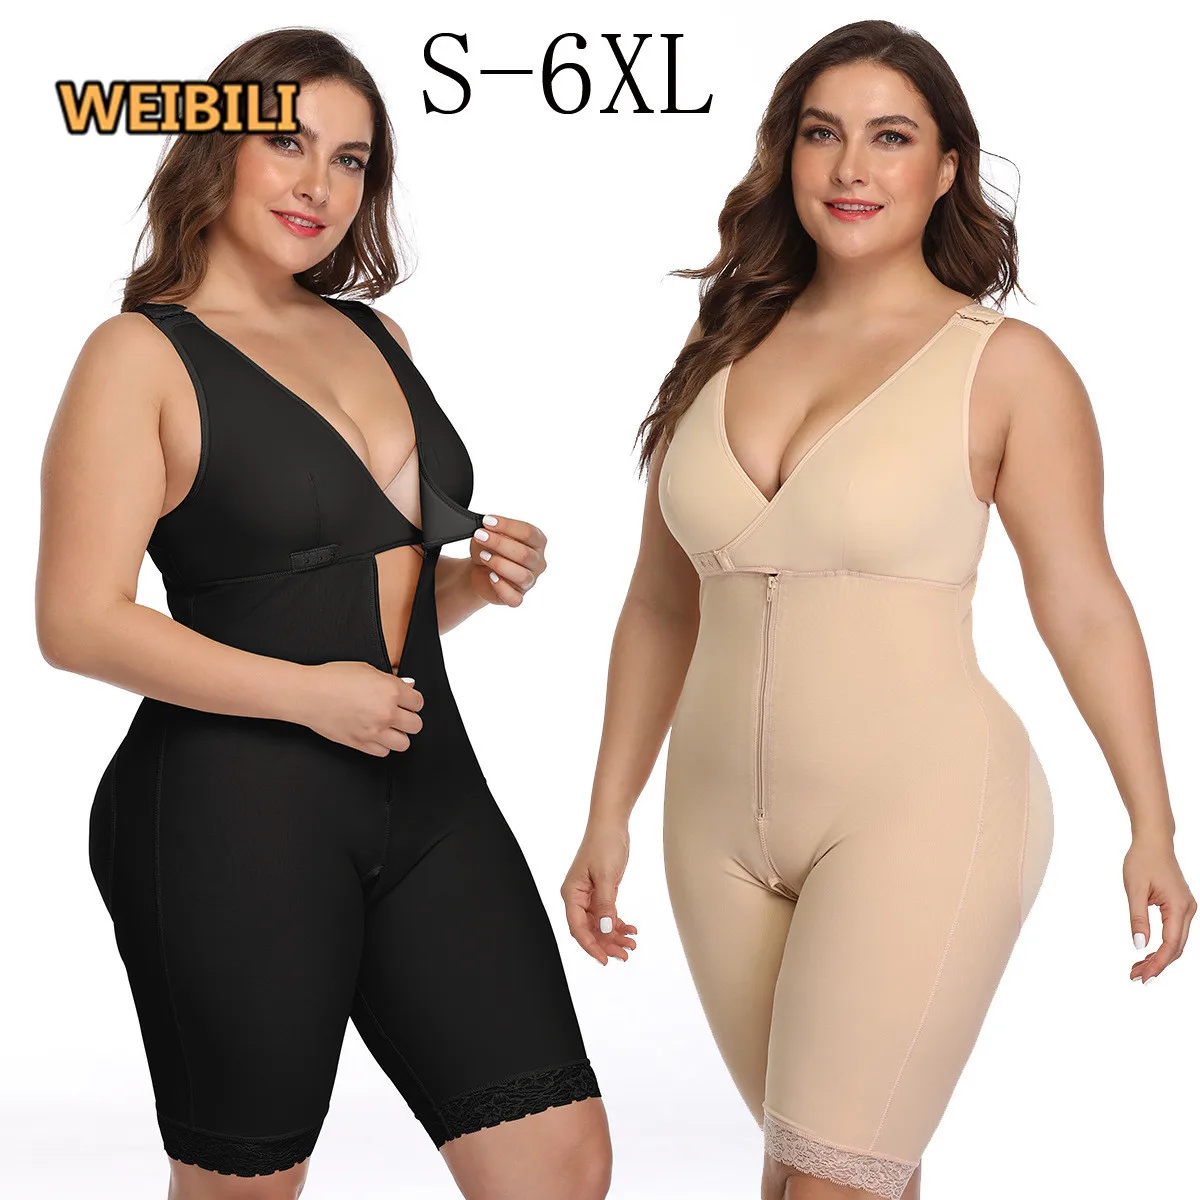 

Bodysuit Slim Best Tummy Control Ladies Sexy Body Shapers Slimming with open crotch Fajas Colombianas Shapewear for Women, Black,nude